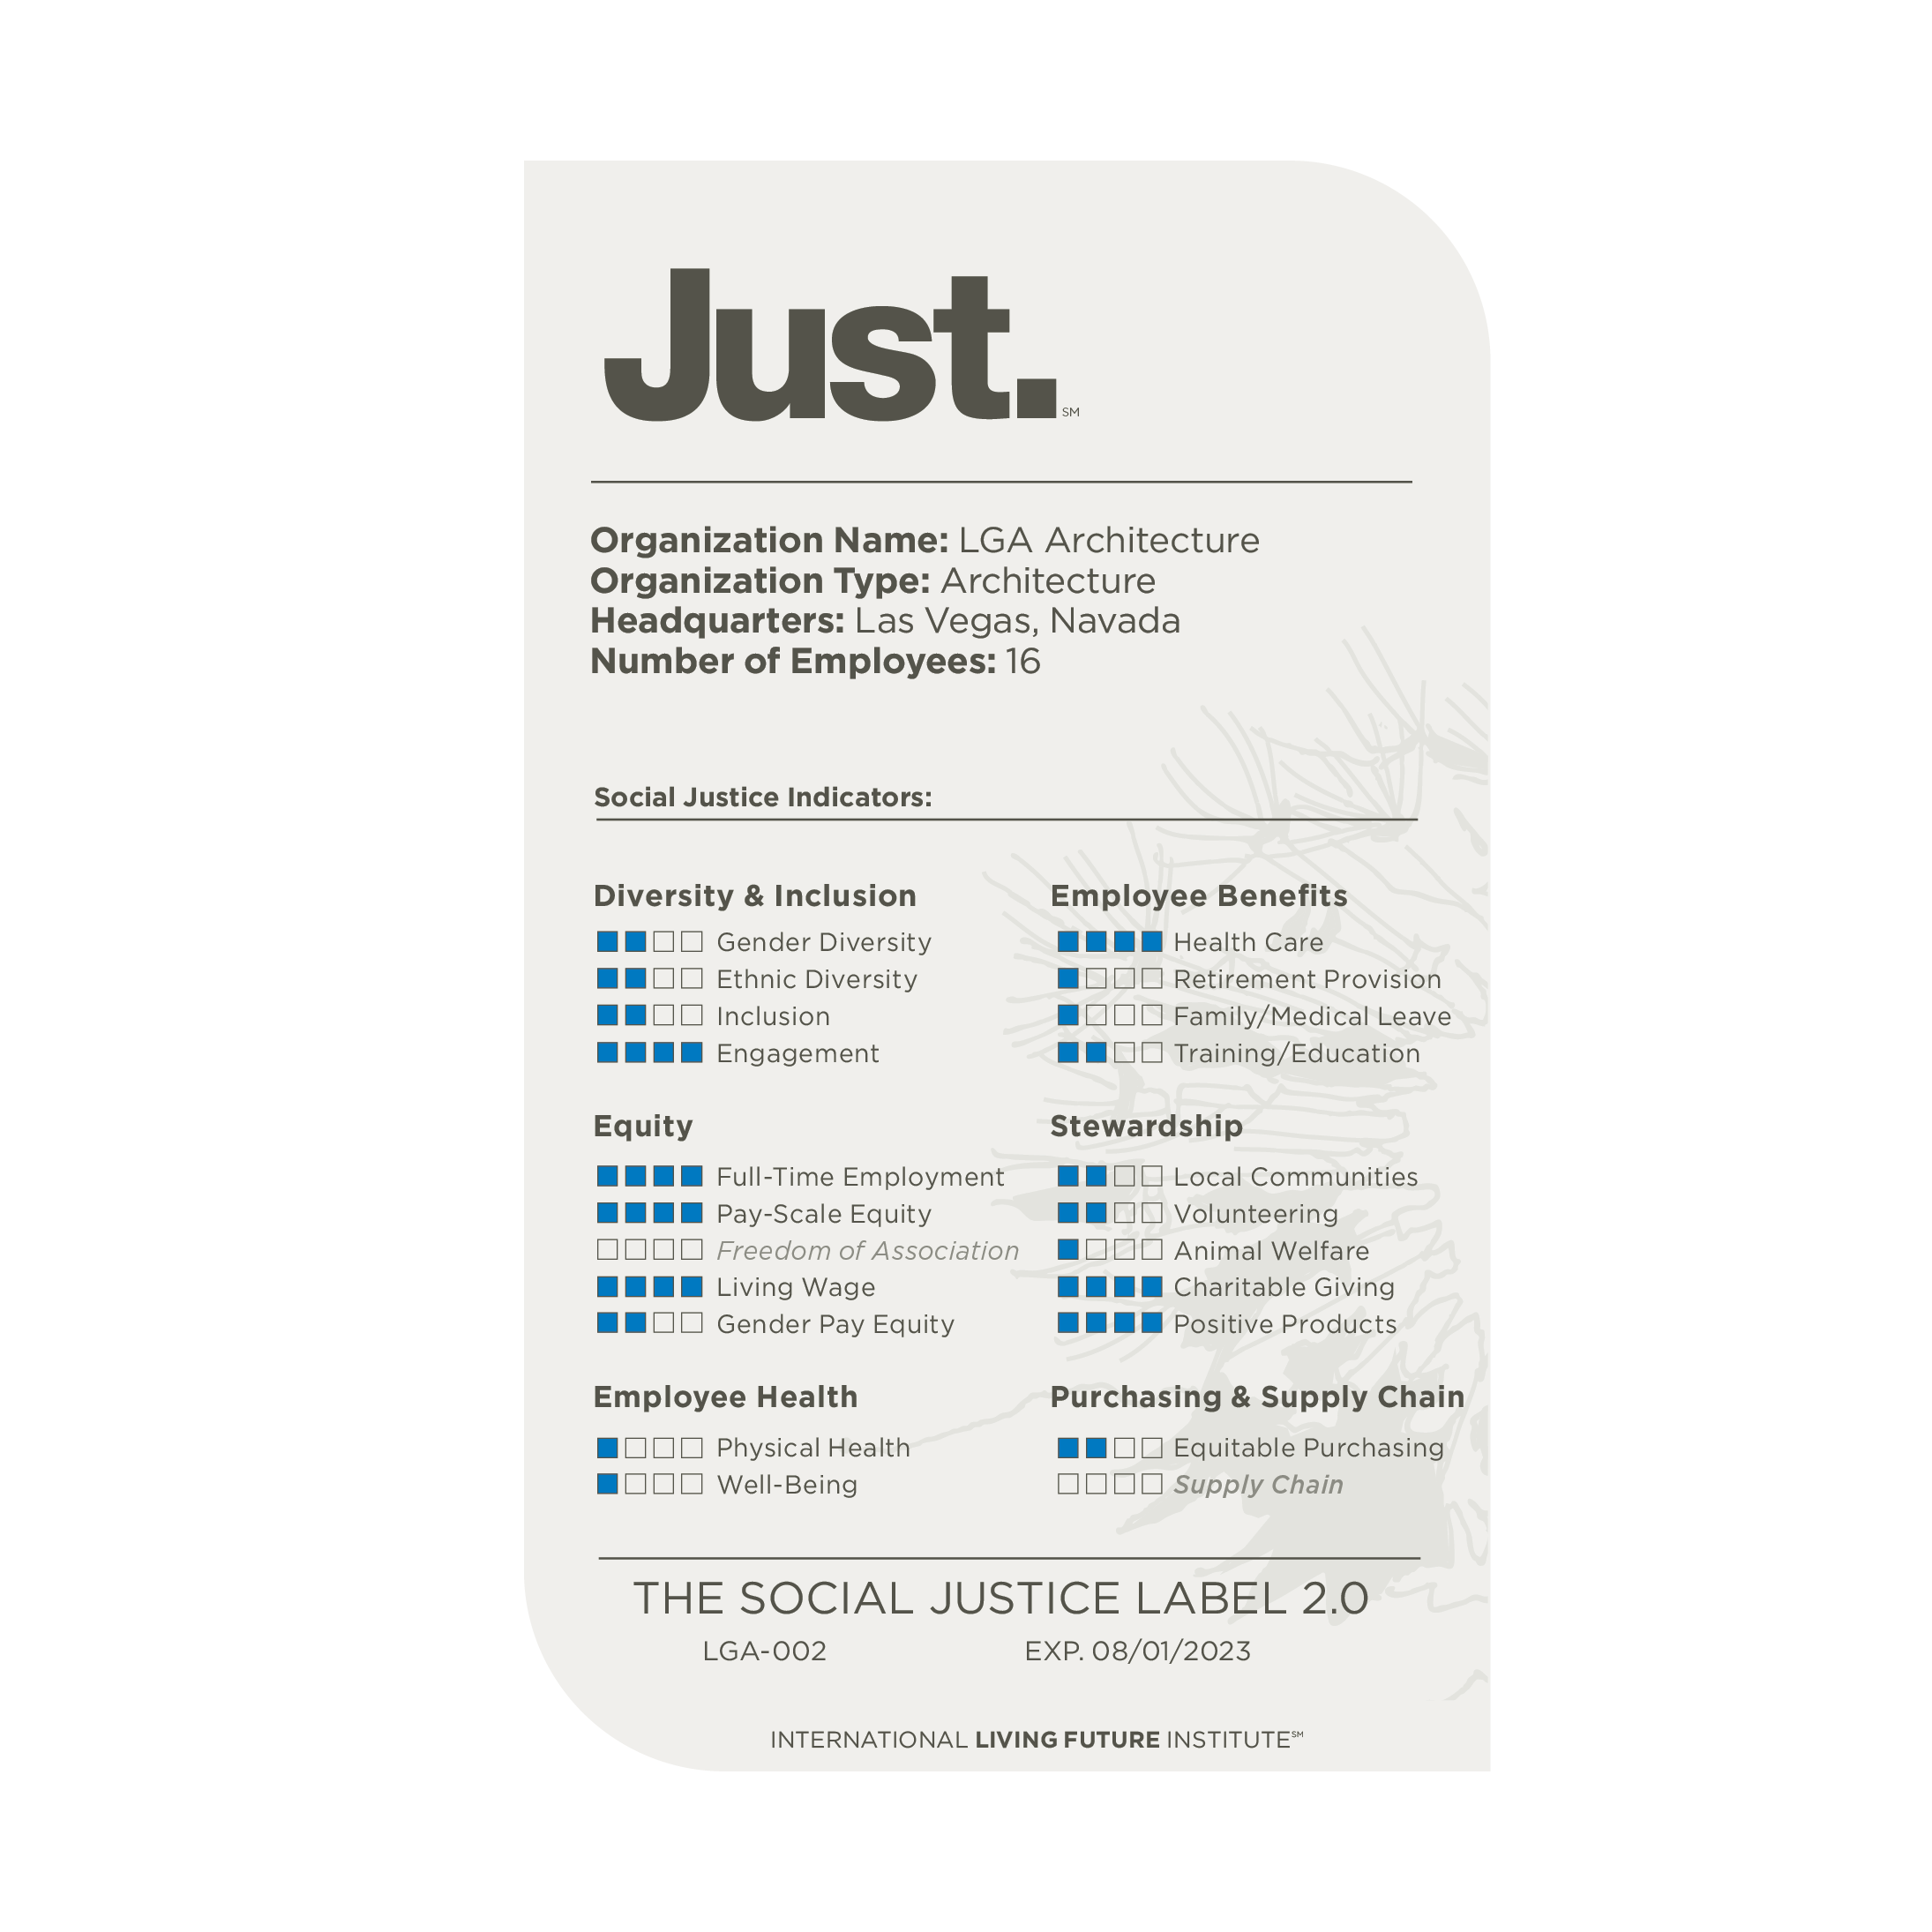 LGA Architecture's official JUST label